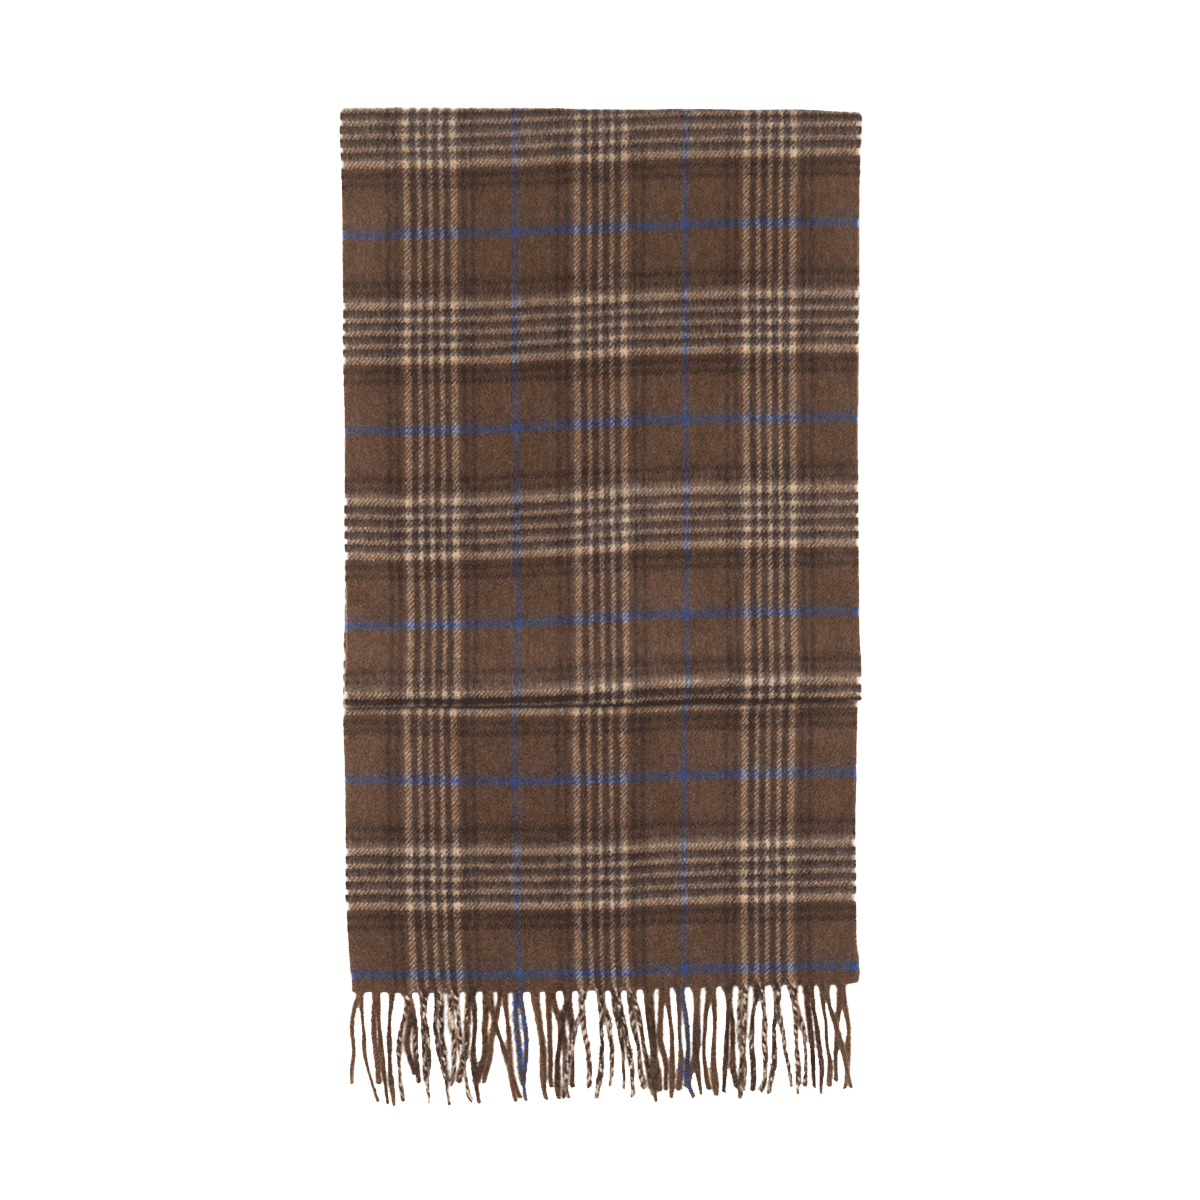 House Check Cashmere Scarf - Brown/Grey/Blue